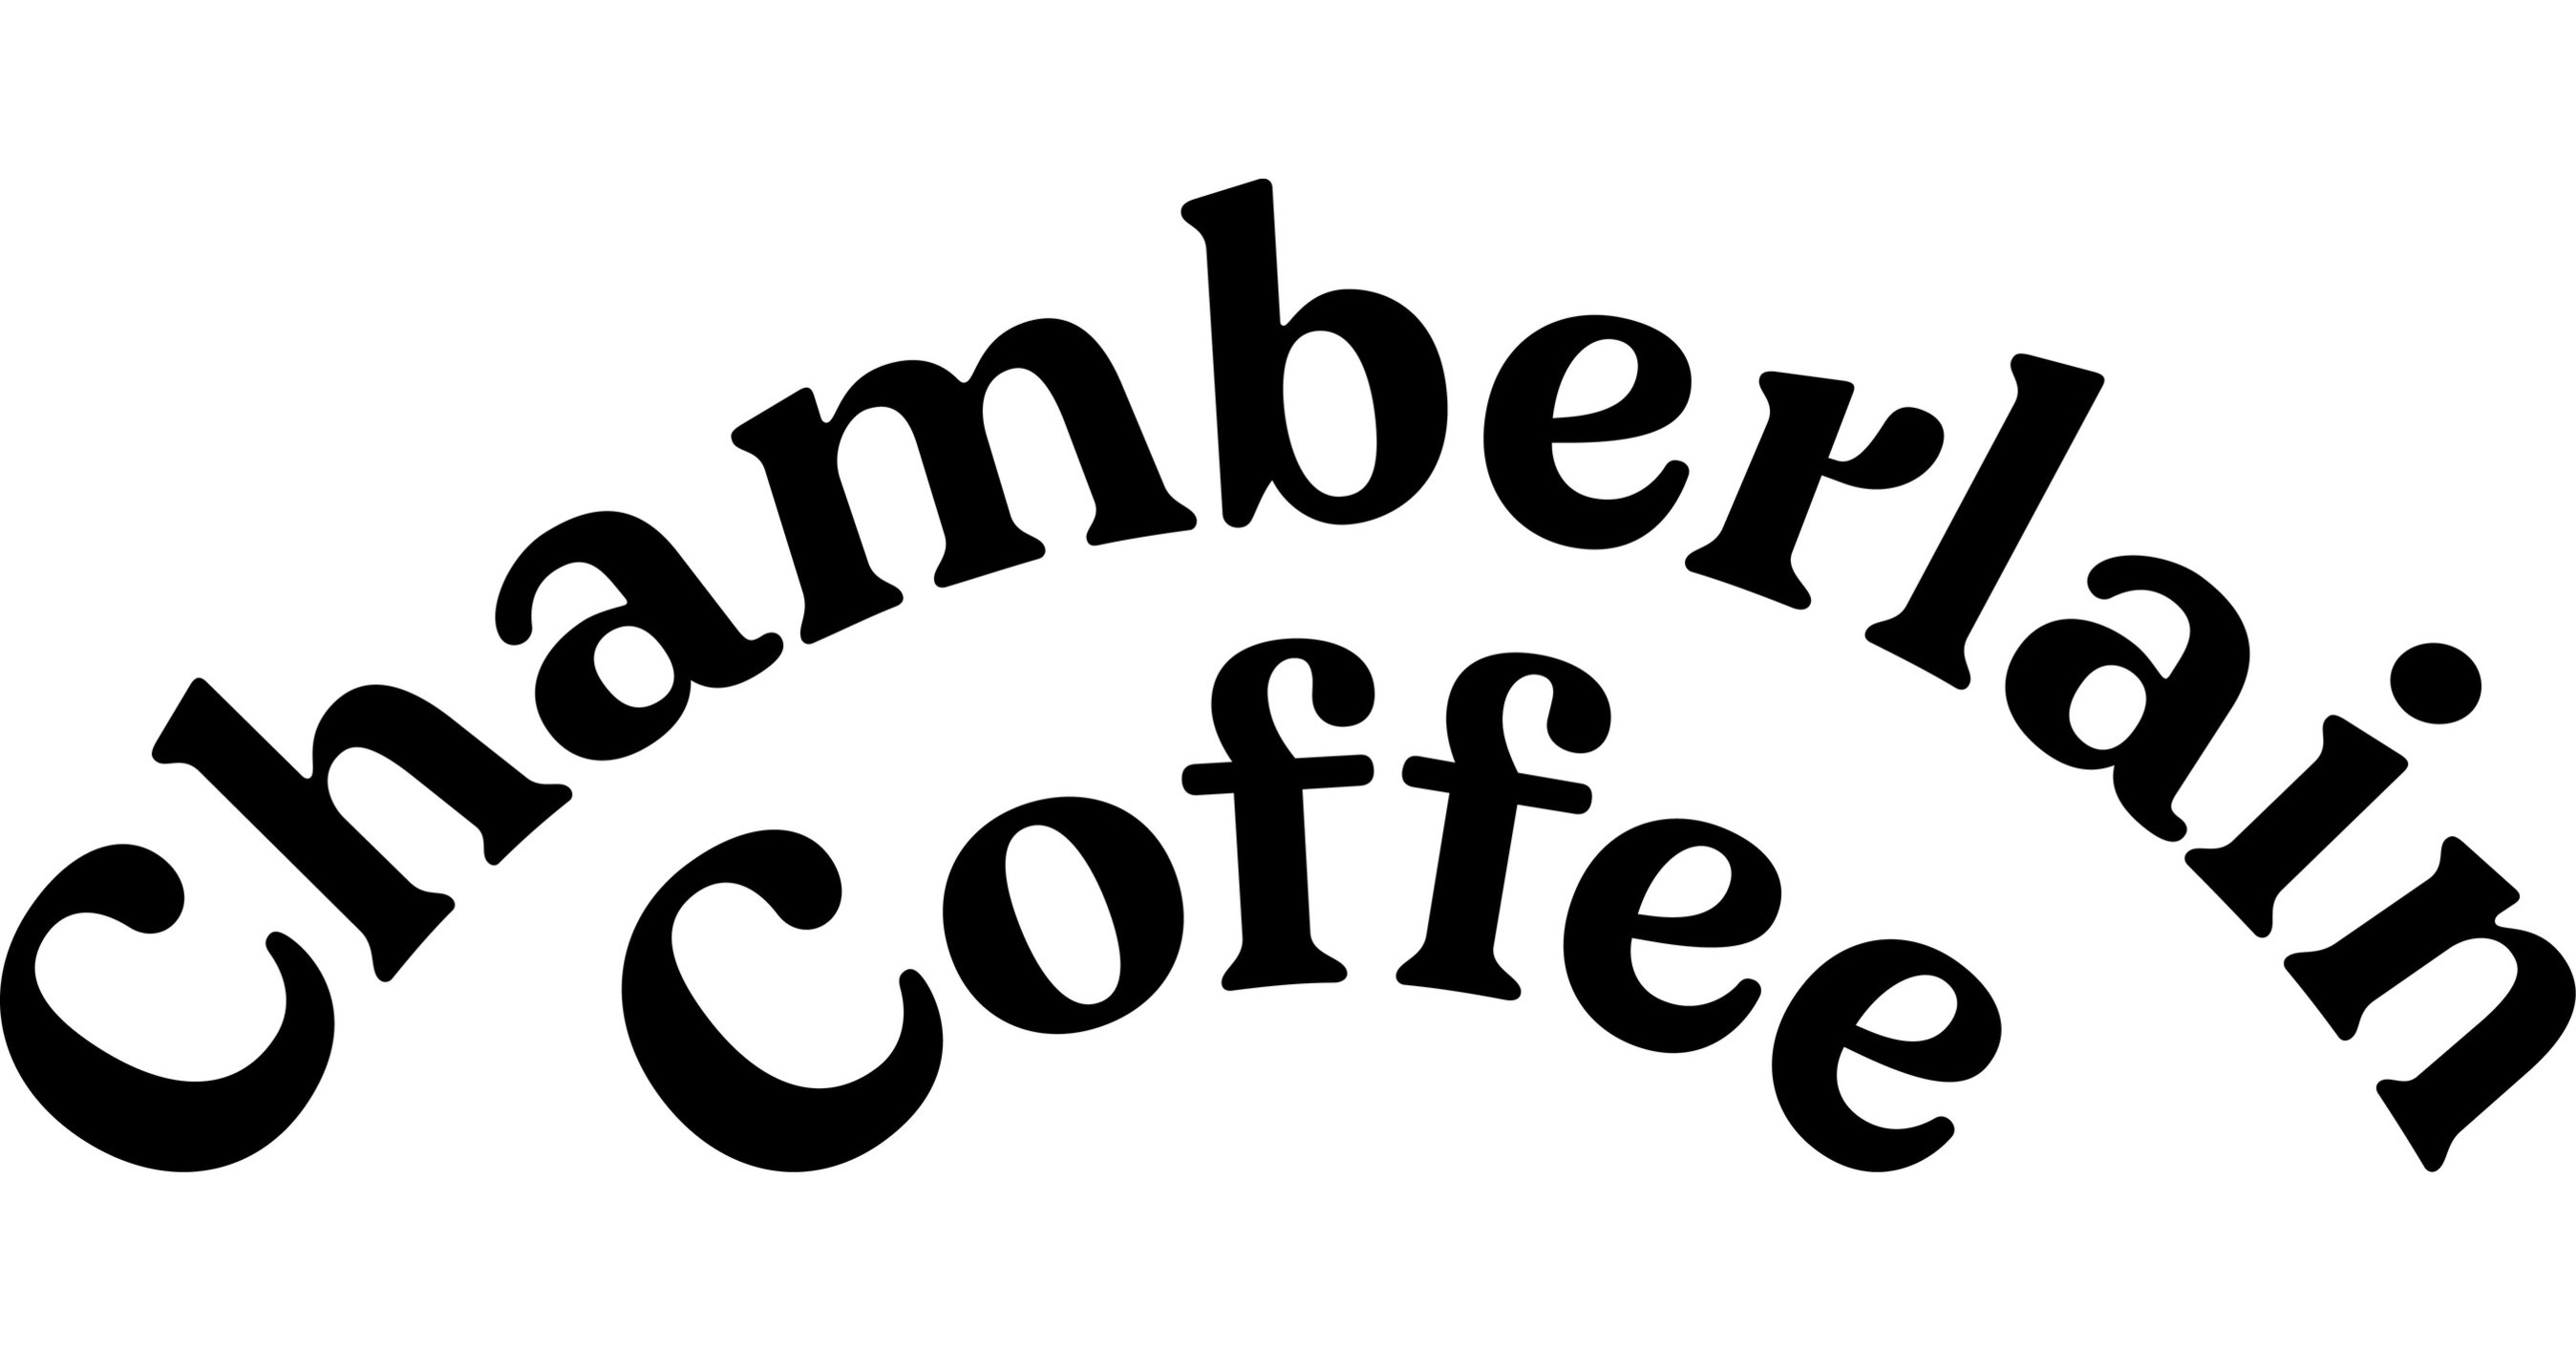 Chamberlain Coffee Raises $7M In Series A Funding Round To Support Brand Growth